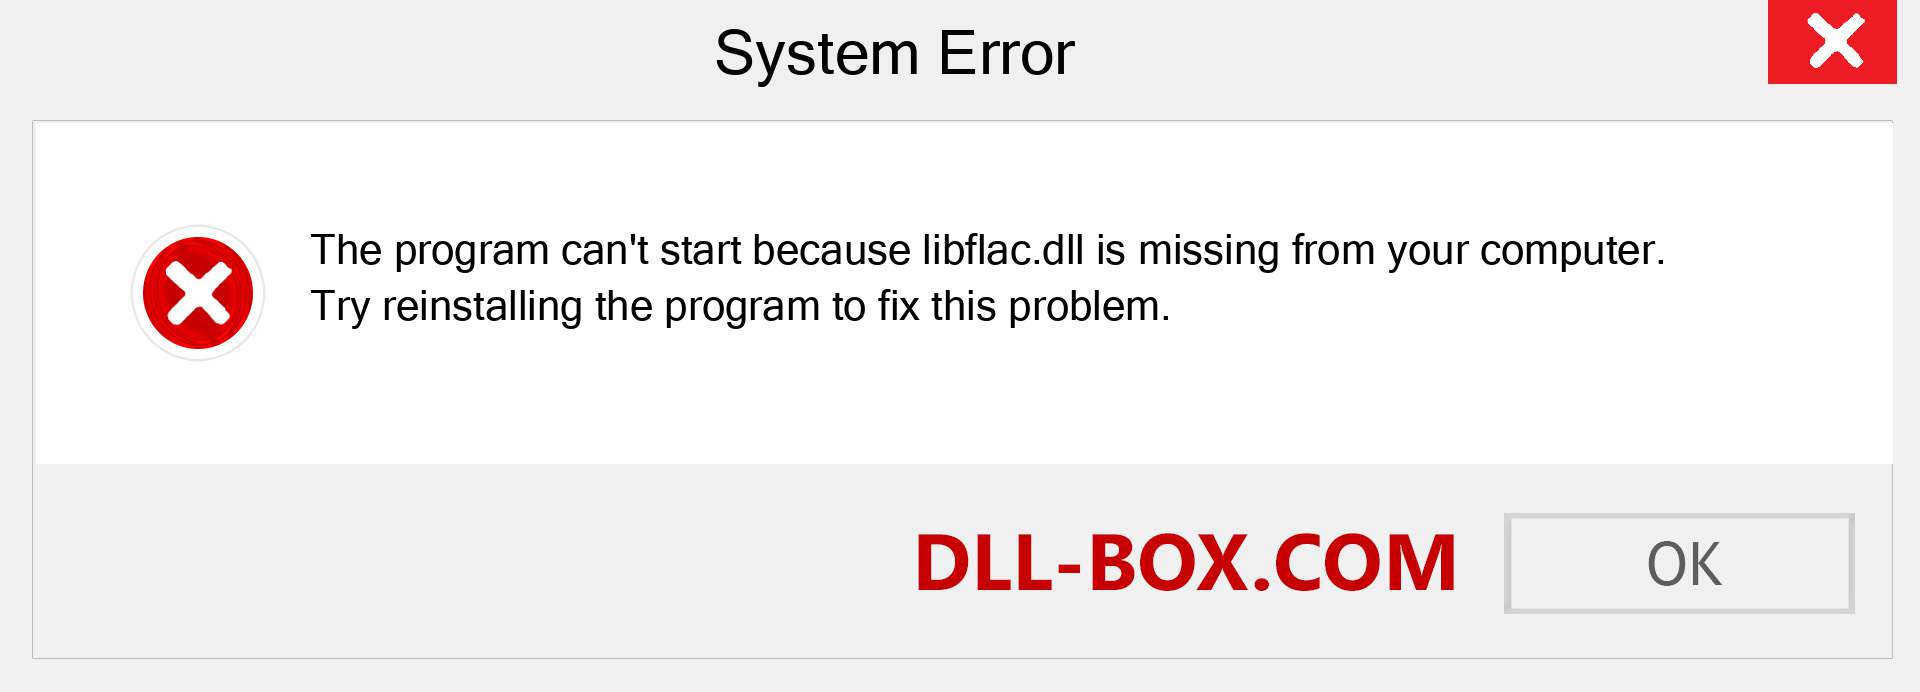  libflac.dll file is missing?. Download for Windows 7, 8, 10 - Fix  libflac dll Missing Error on Windows, photos, images